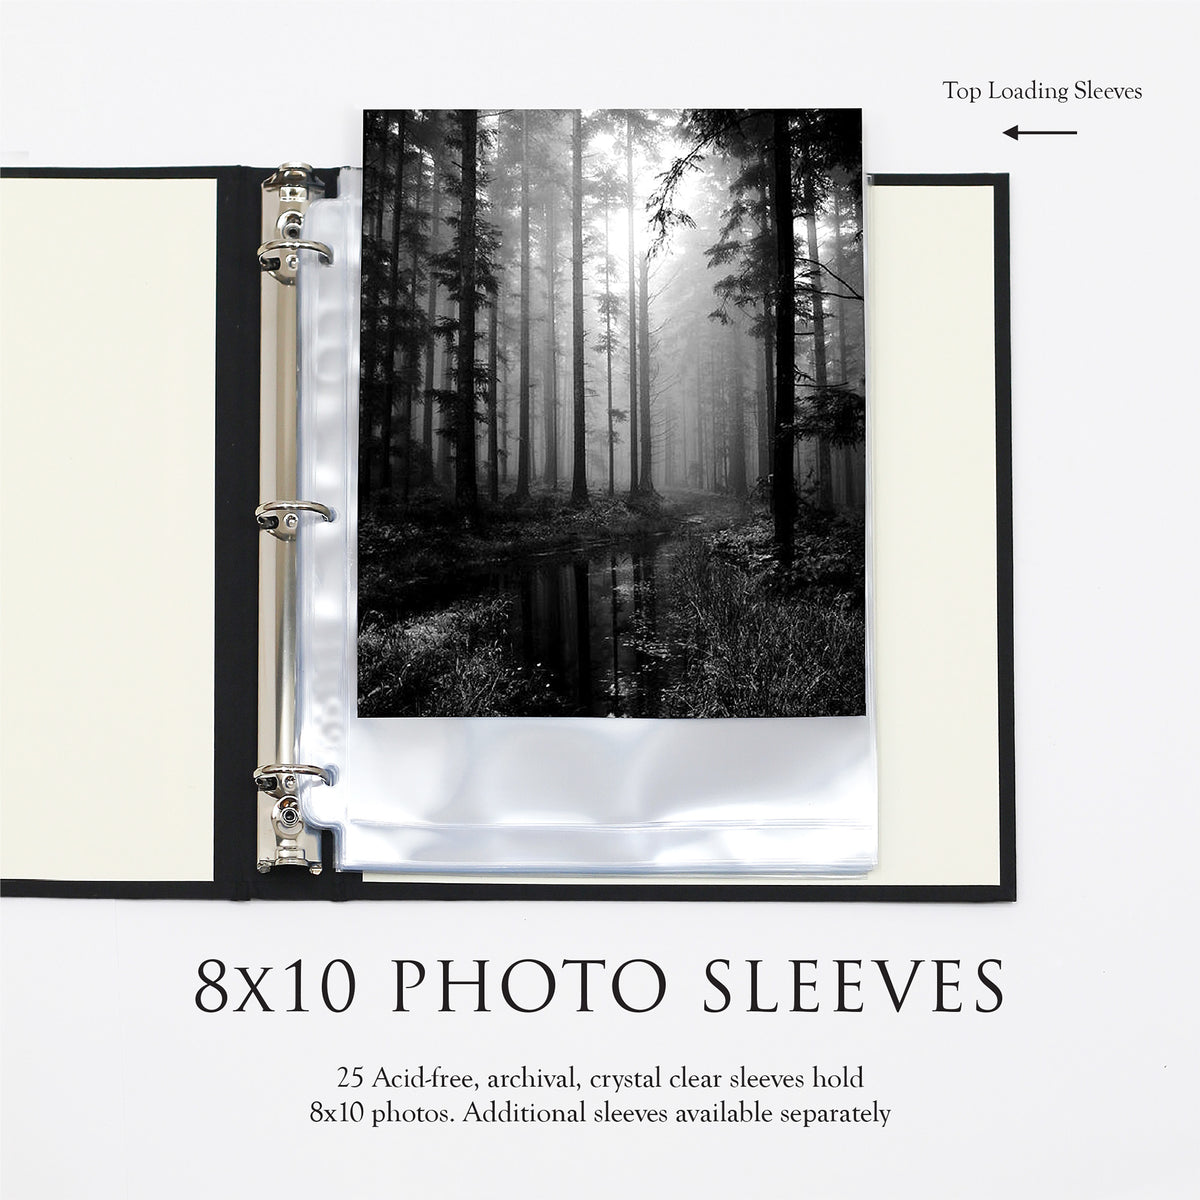 Large Photo Binder For 8x10 Photos | Cover: Lavender Cotton | Available Personalized